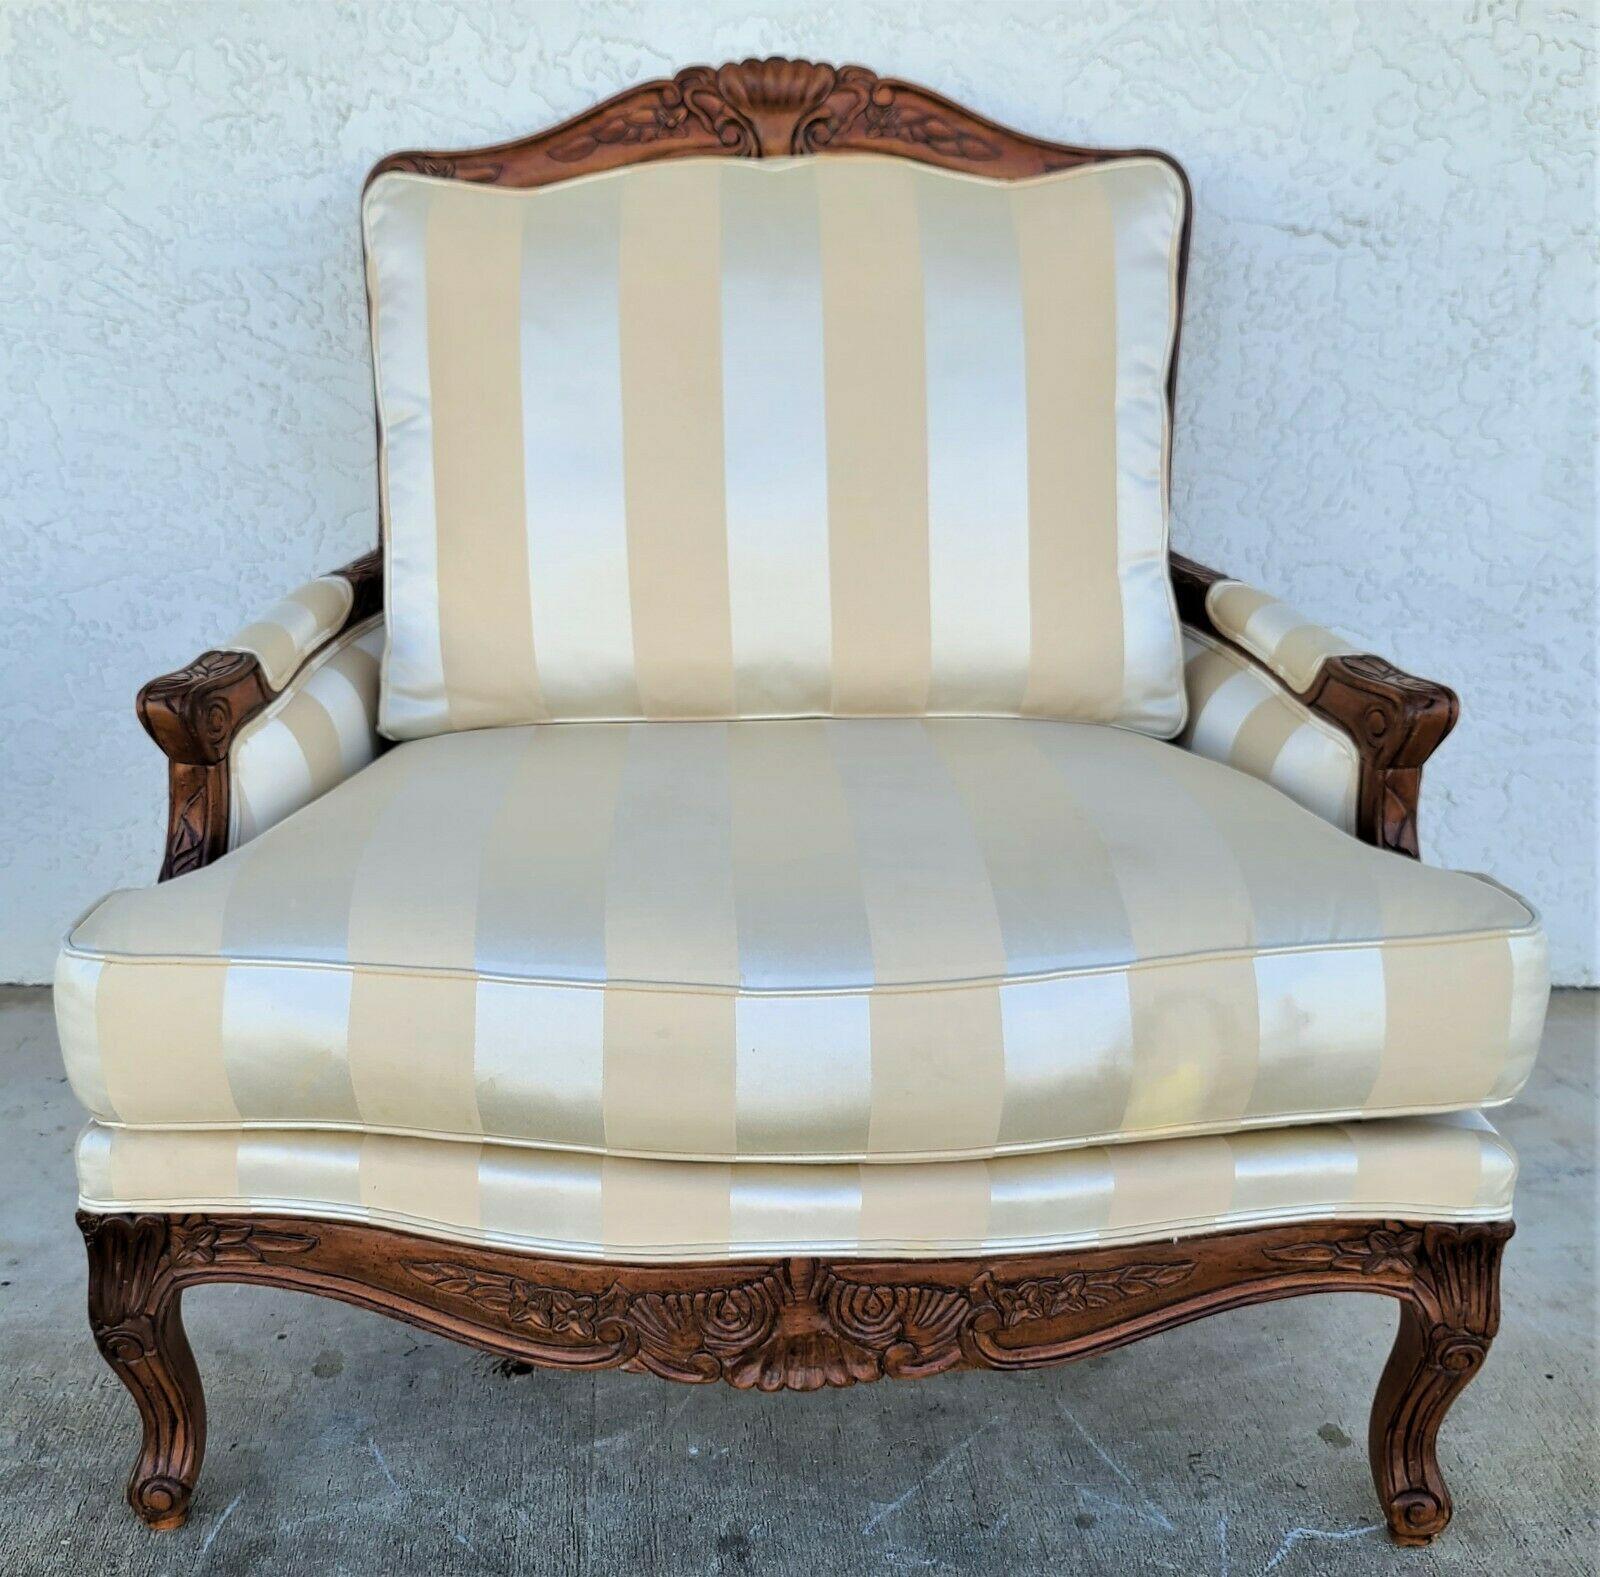 Offering One Of Our Recent Palm Beach Estate Fine Furniture Acquisitions Of A ETHAN ALLEN Oversized French Provincial Bergere lounge armchair

Approximate Measurements in Inches
42.5